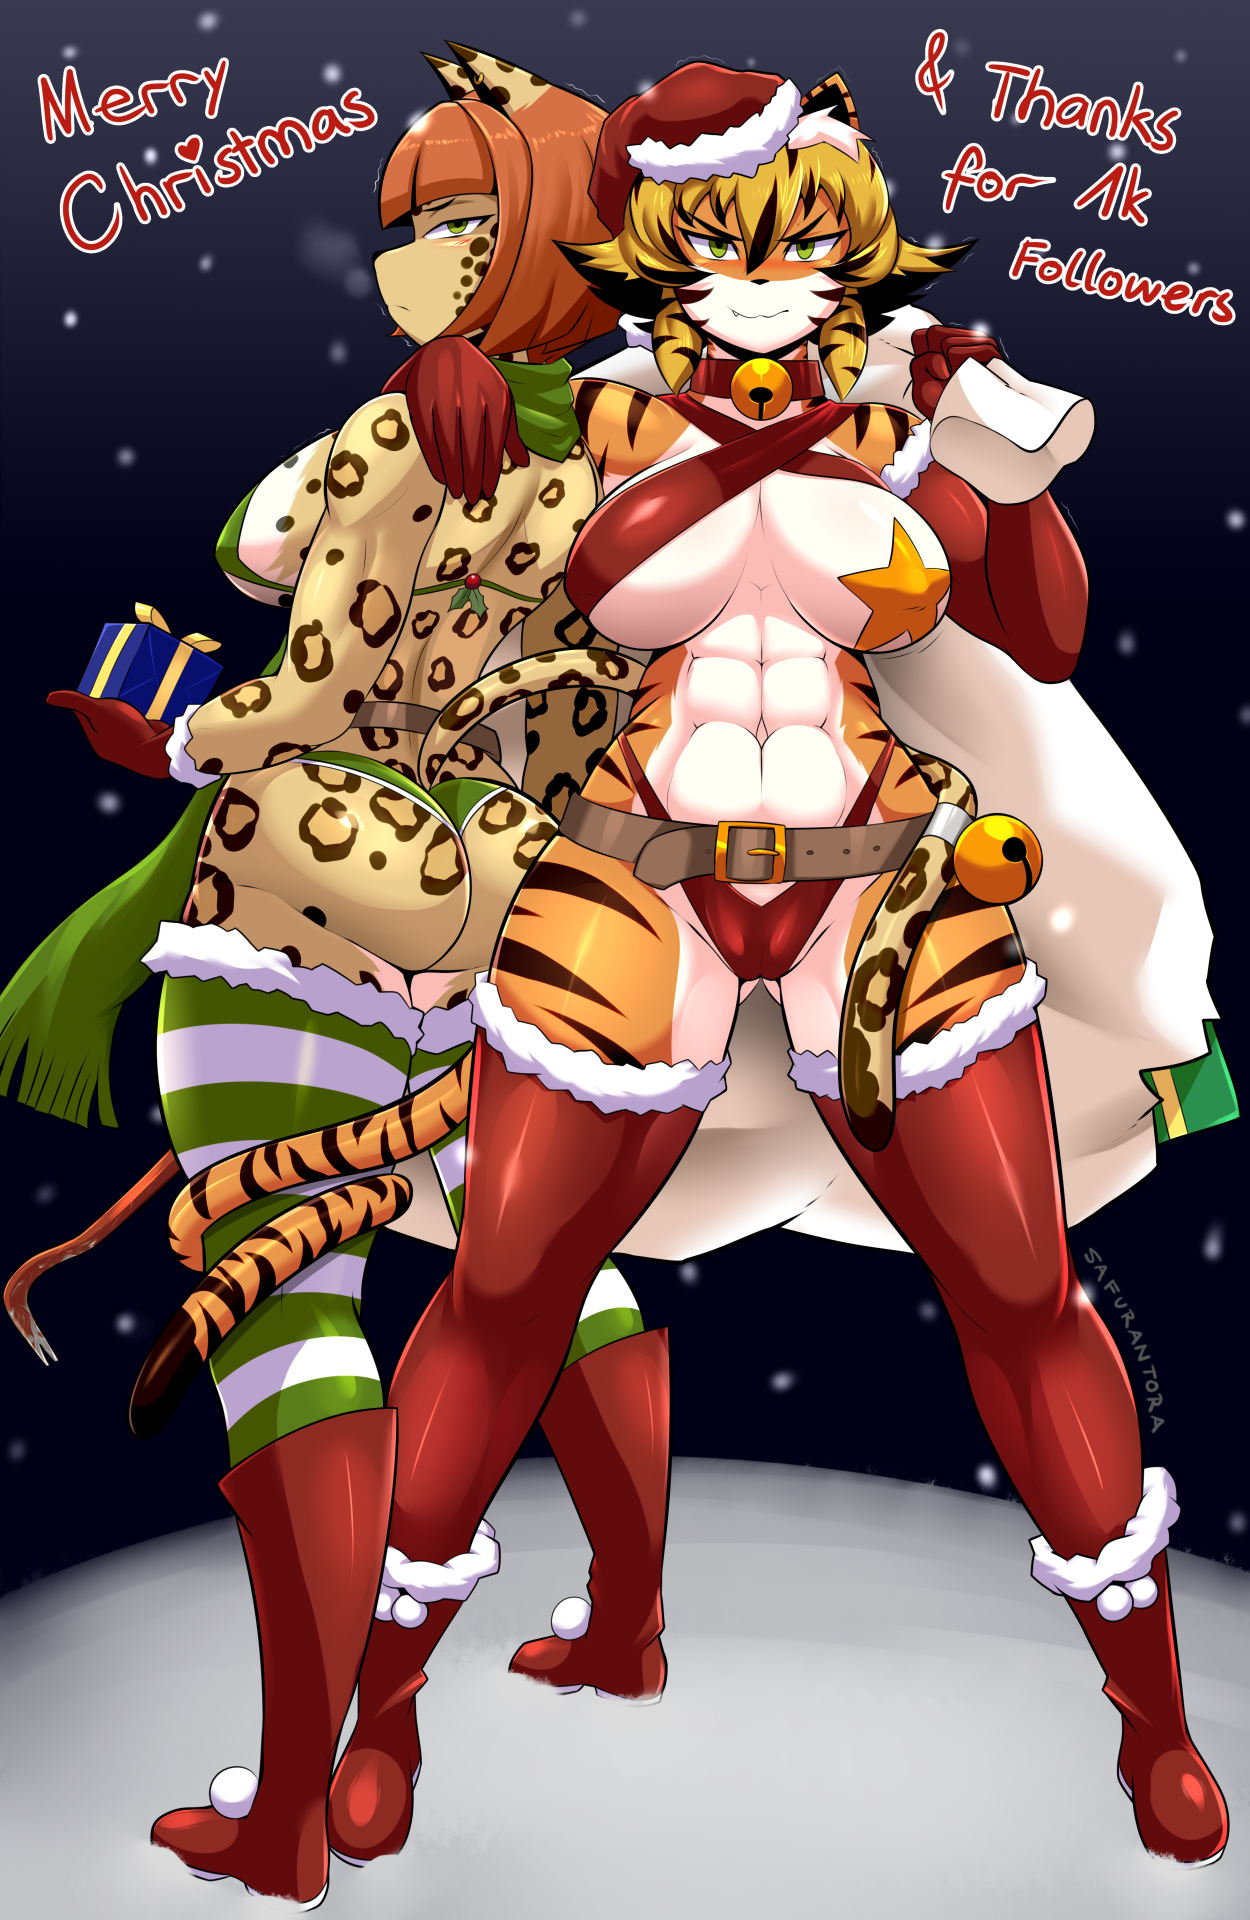 safurantora:  safurantora: Merry Christmas and thank you all for the support! As